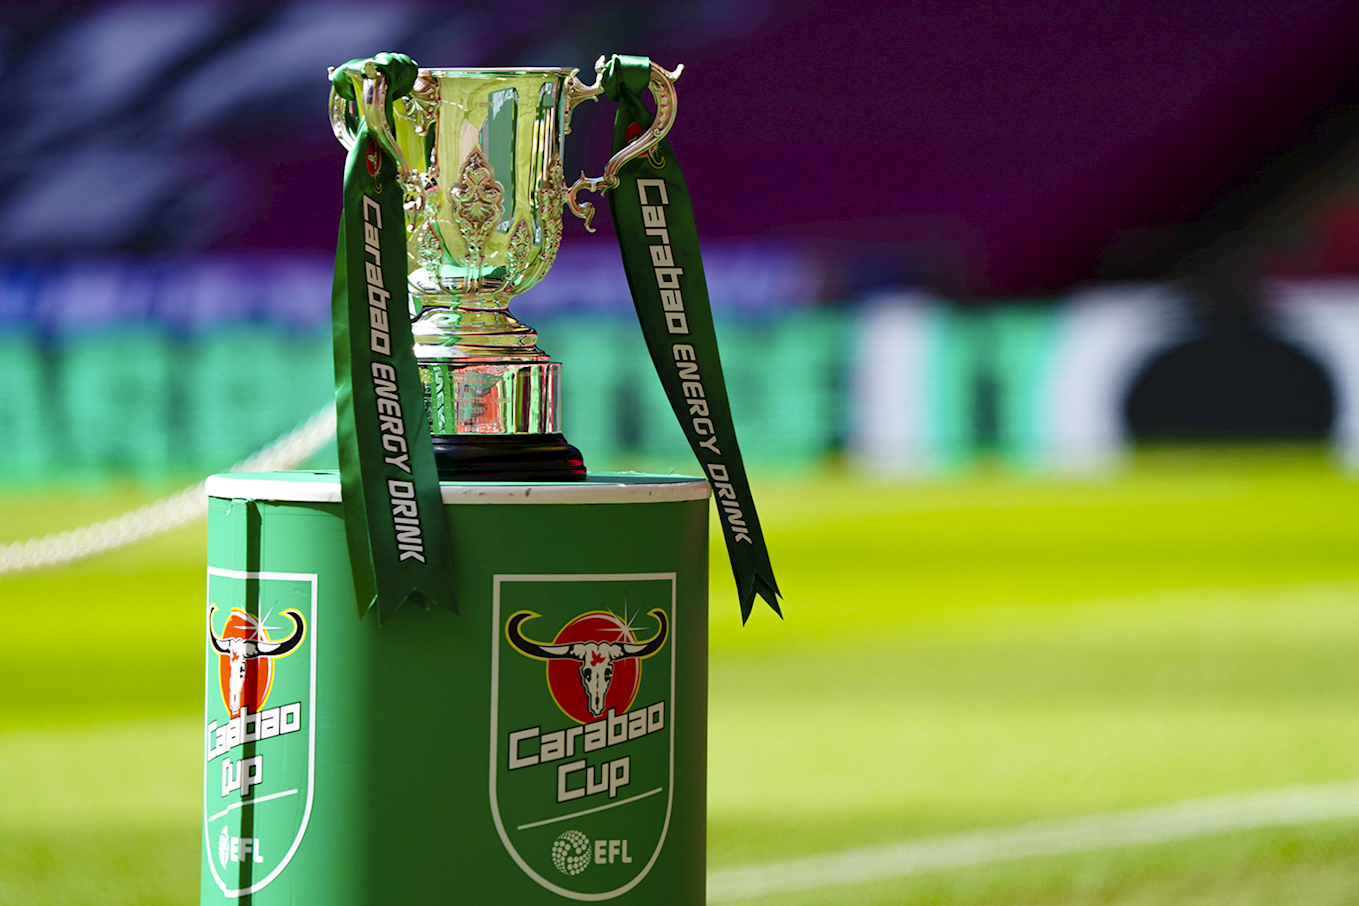 CARABAO CUP DRAW TO TAKE PLACE ON EFL FIXTURE RELEASE DAY - News